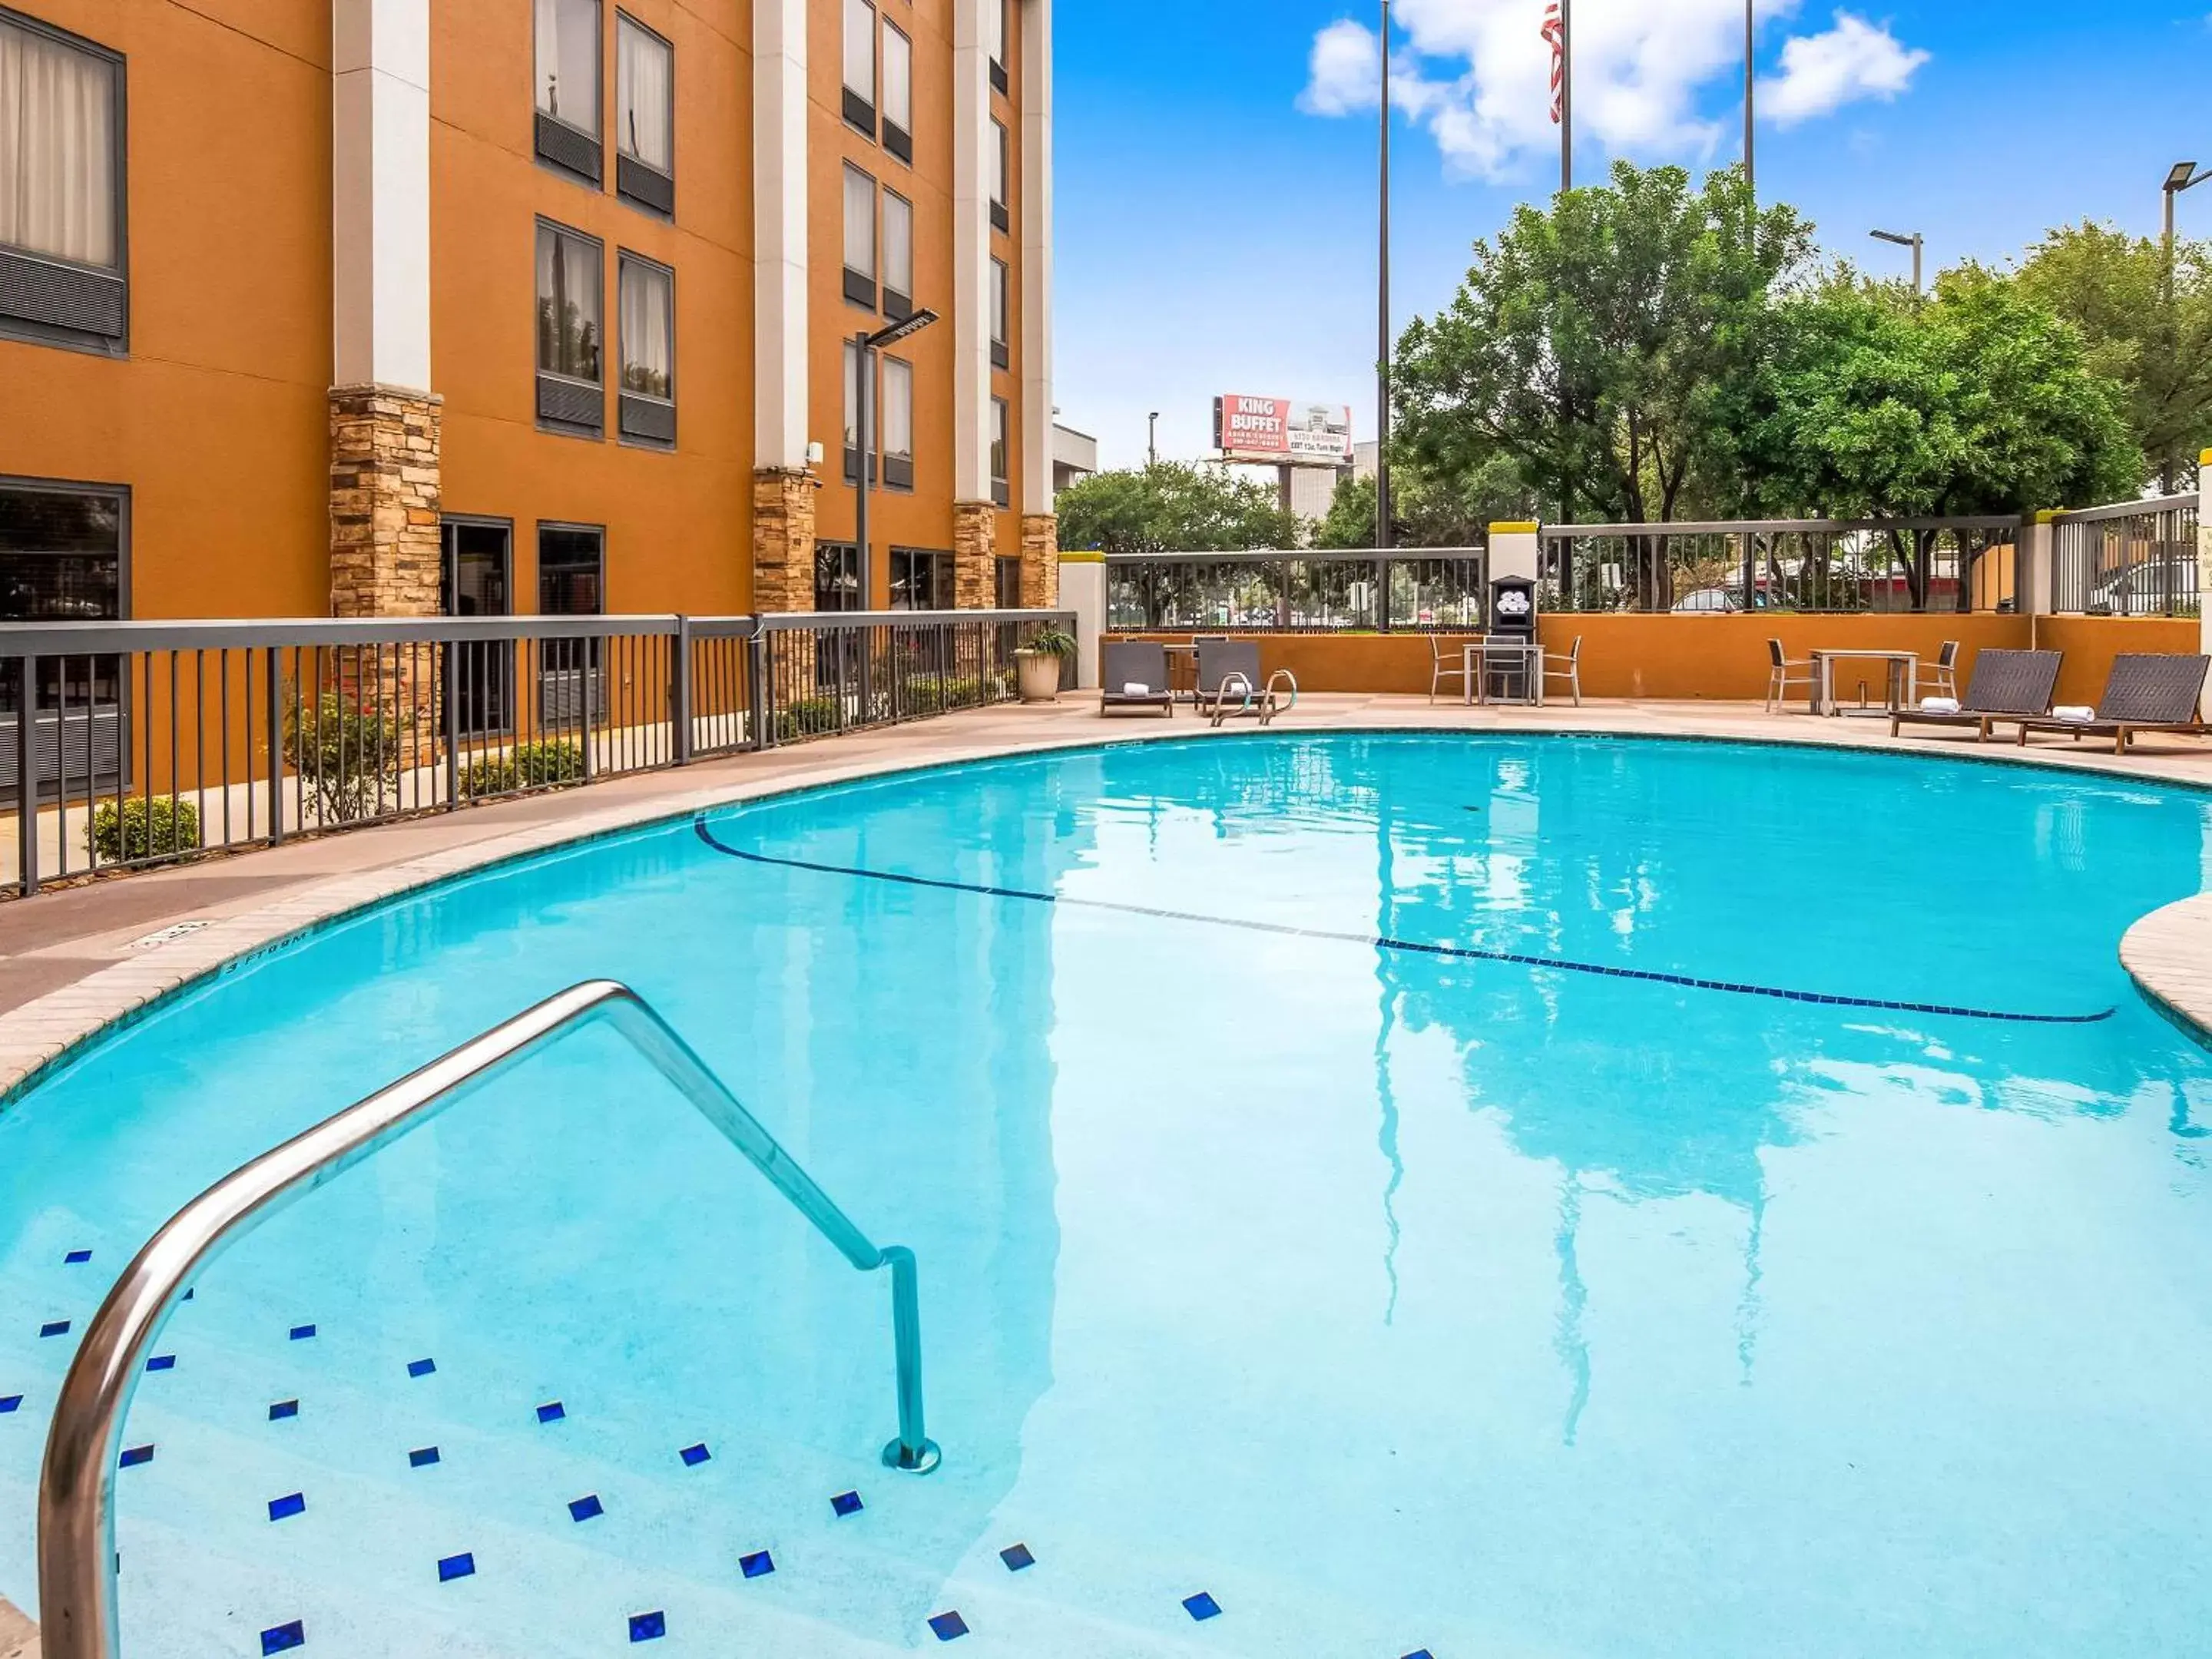 Activities, Swimming Pool in Clarion Pointe near Medical Center